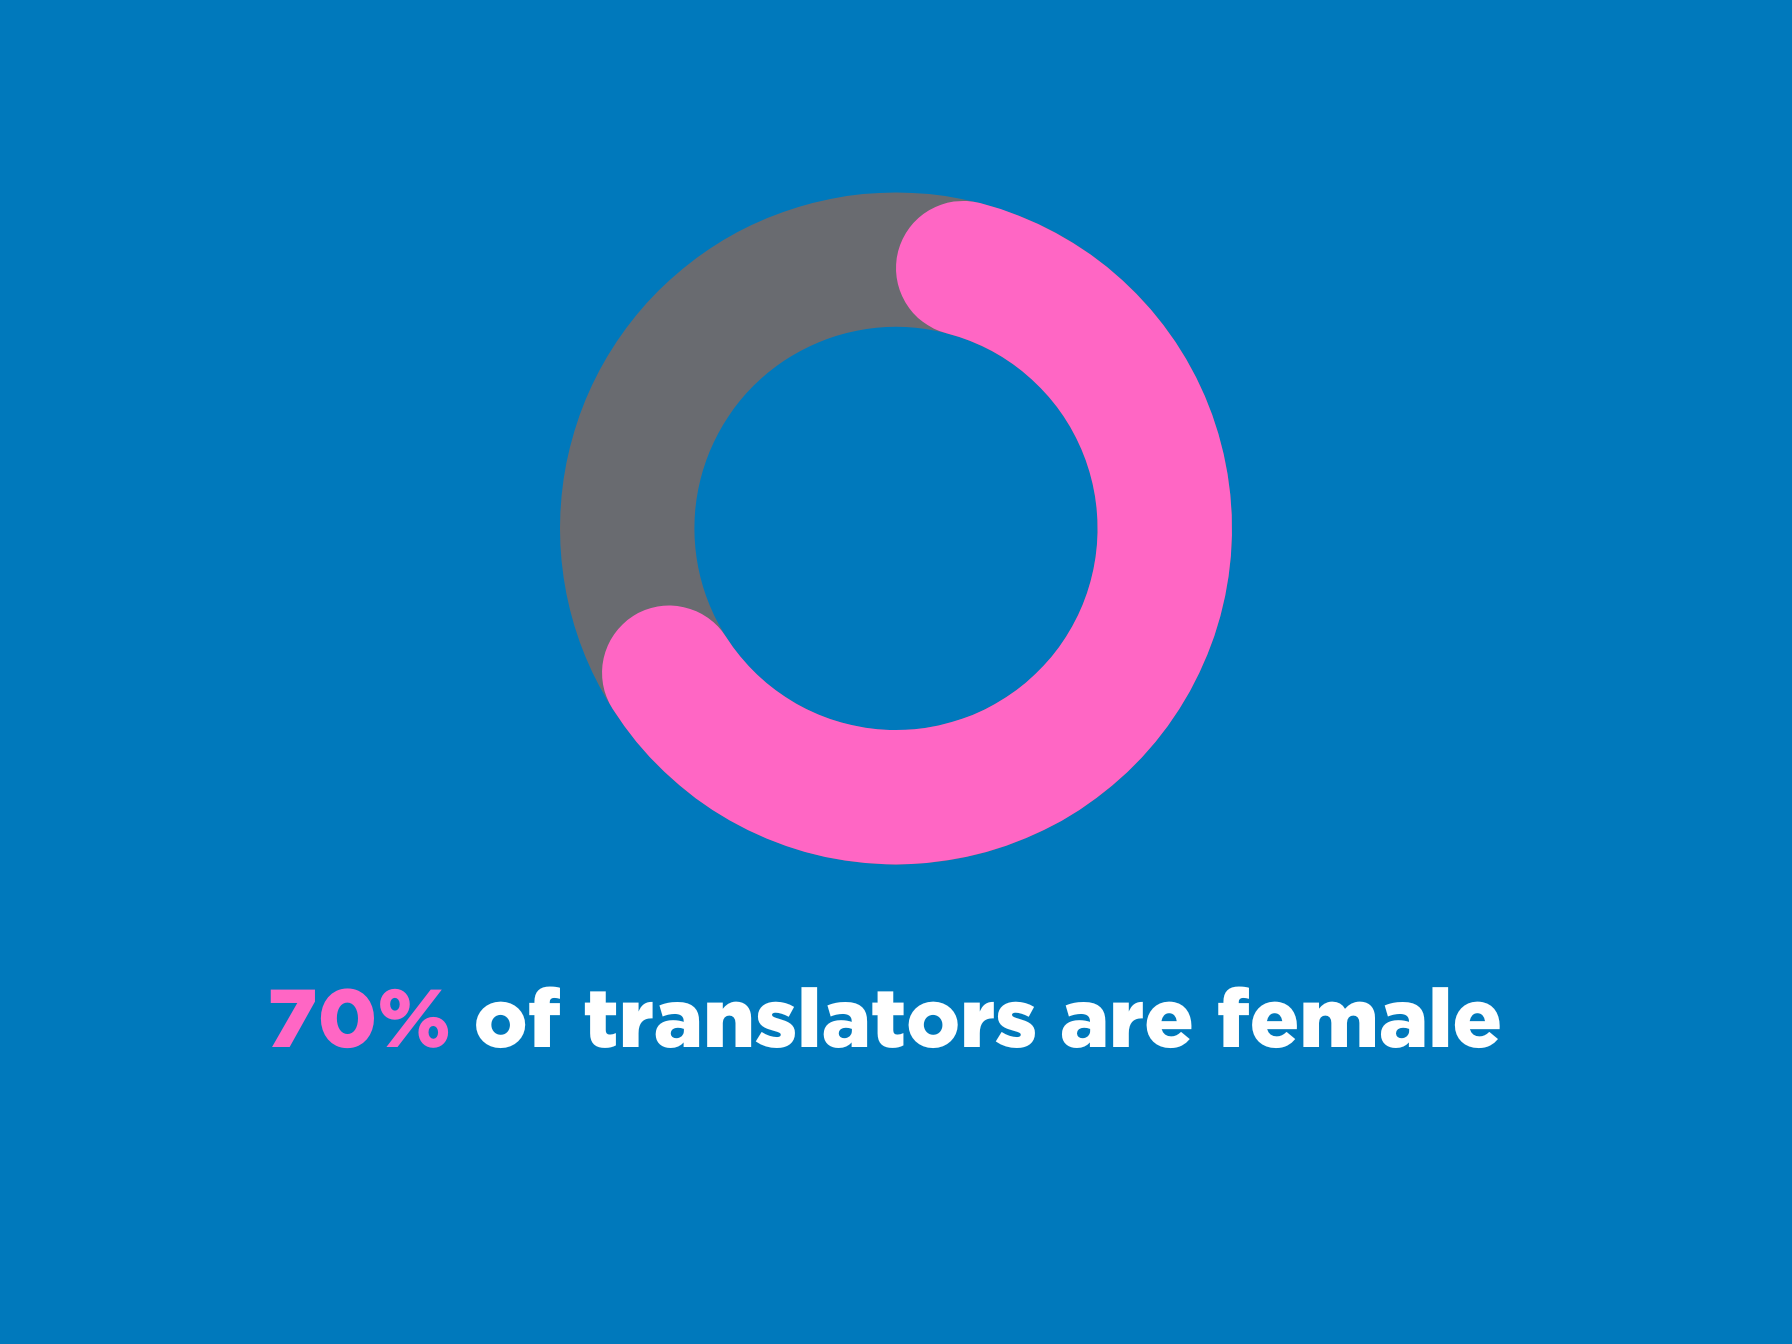 Pie graph showing 70% of translators are female